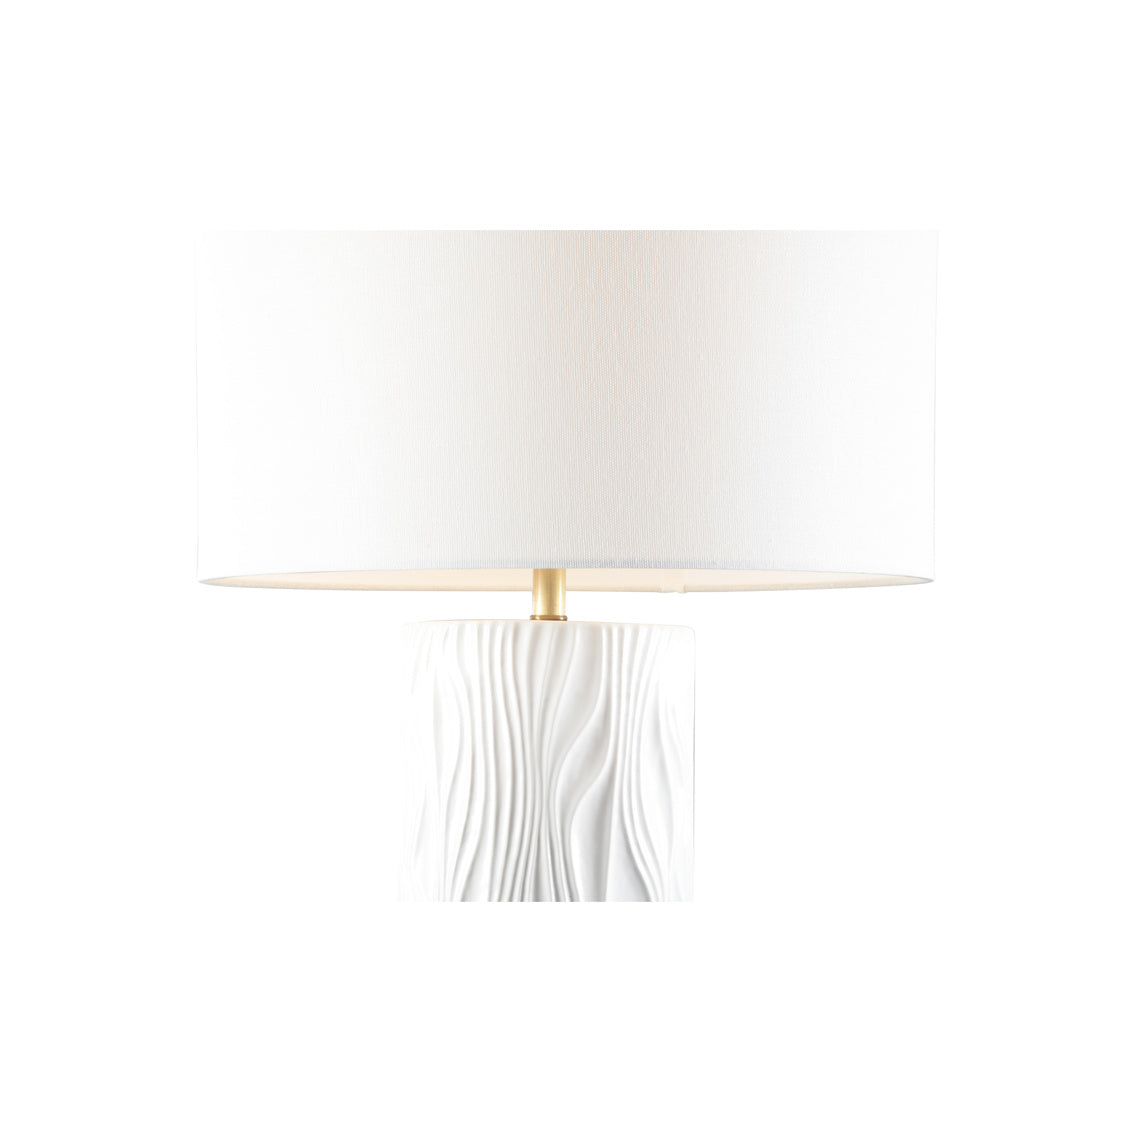 Satin Folds Lamp in white, detail view